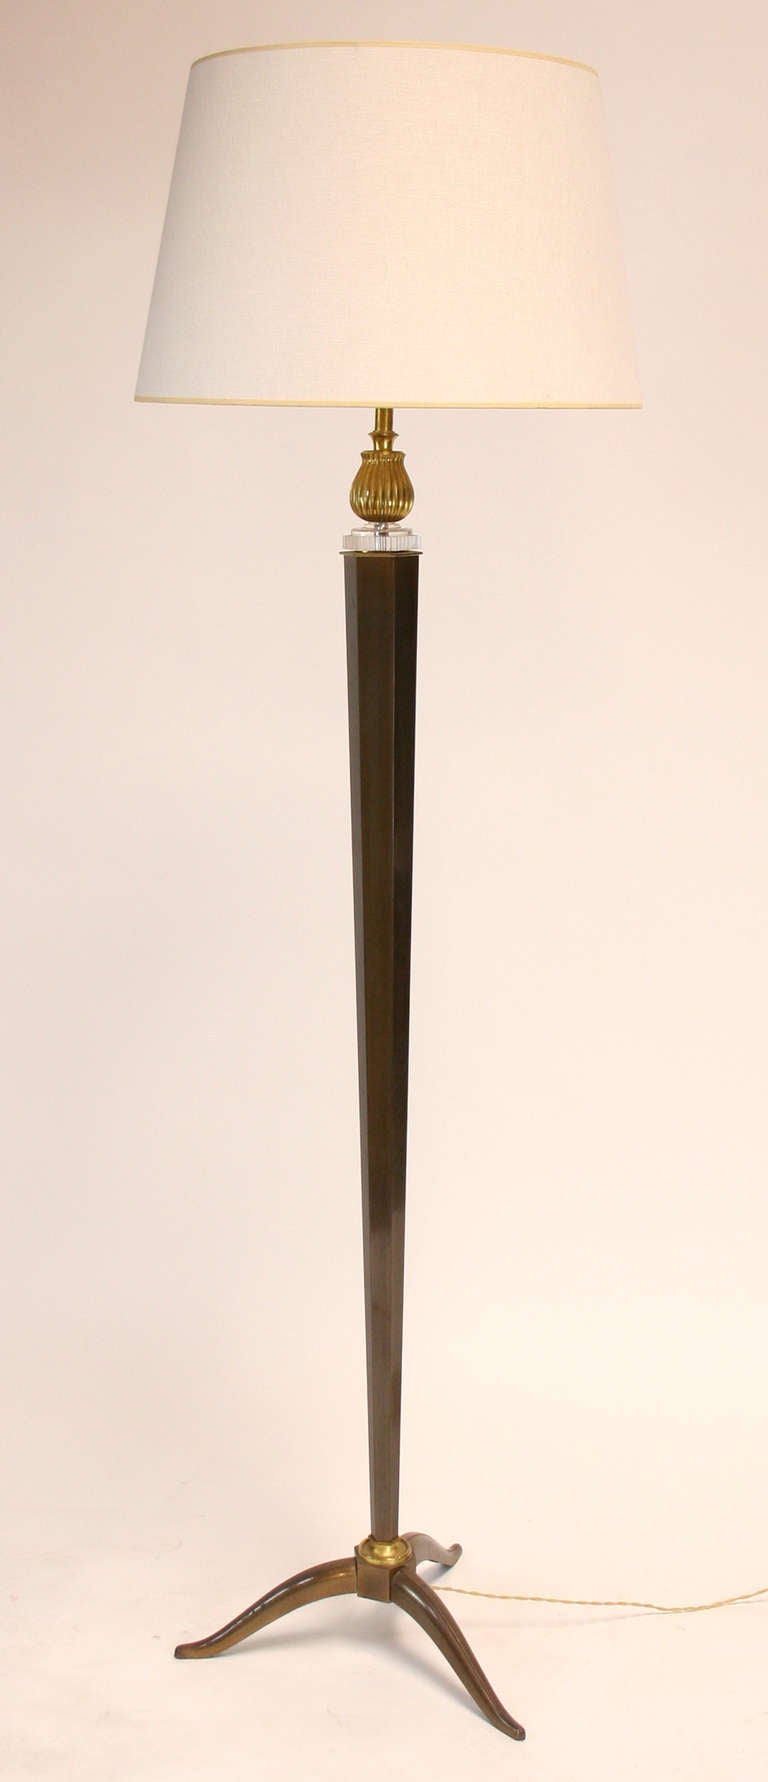 Monumental floor lamp with hexagonal, tapered shaft on shaped tripod feet with lucite and gilt brass detailing. 63 3/4" to top of socket, 72 1/2" H, 3" W, 20" dia. @ base. Shade shown for showroom use only